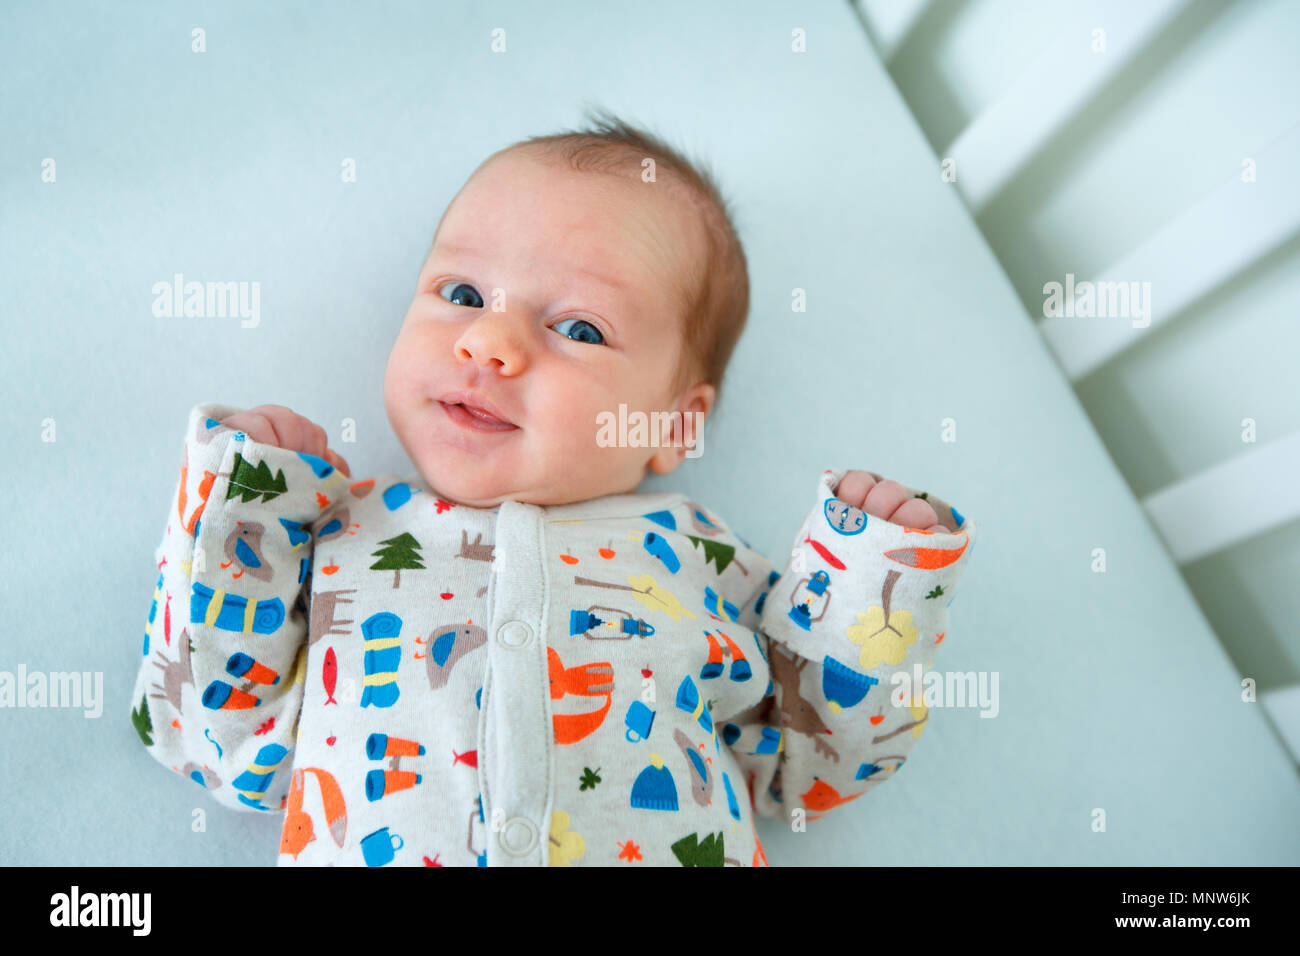 Cute newborn baby girl lying in cradle. Two weeks old infant child on white soft blanket Stock Photo